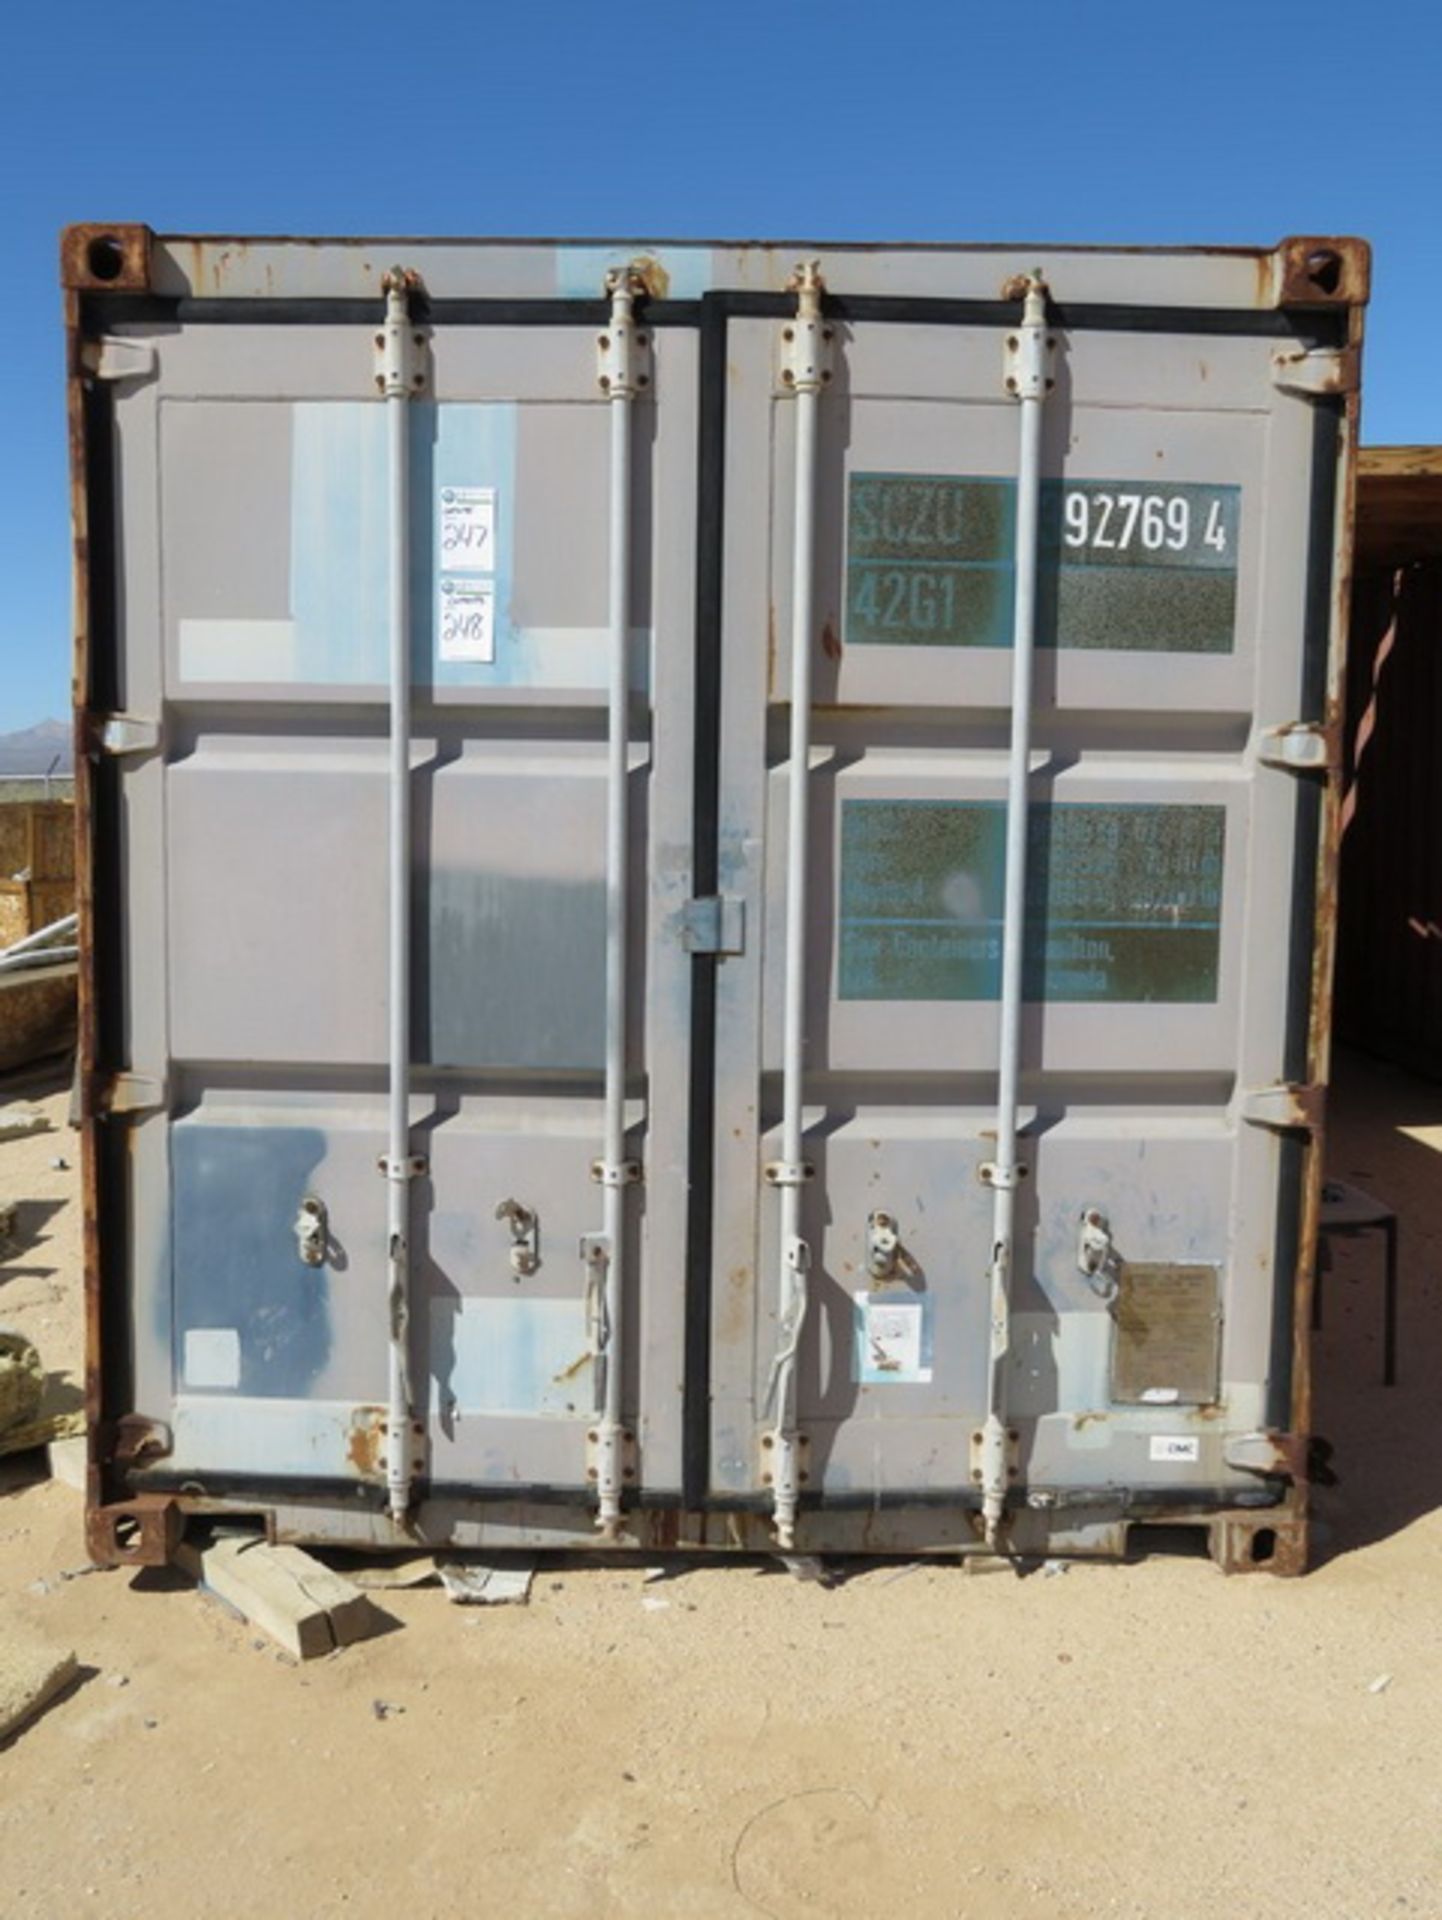 Xinhui CIMC Container Co. 1AA-147GC40 Shipping Container, 40' x 8' x 102"H, 2,389 Cu.Ft, 7,940 LBS - Image 5 of 6